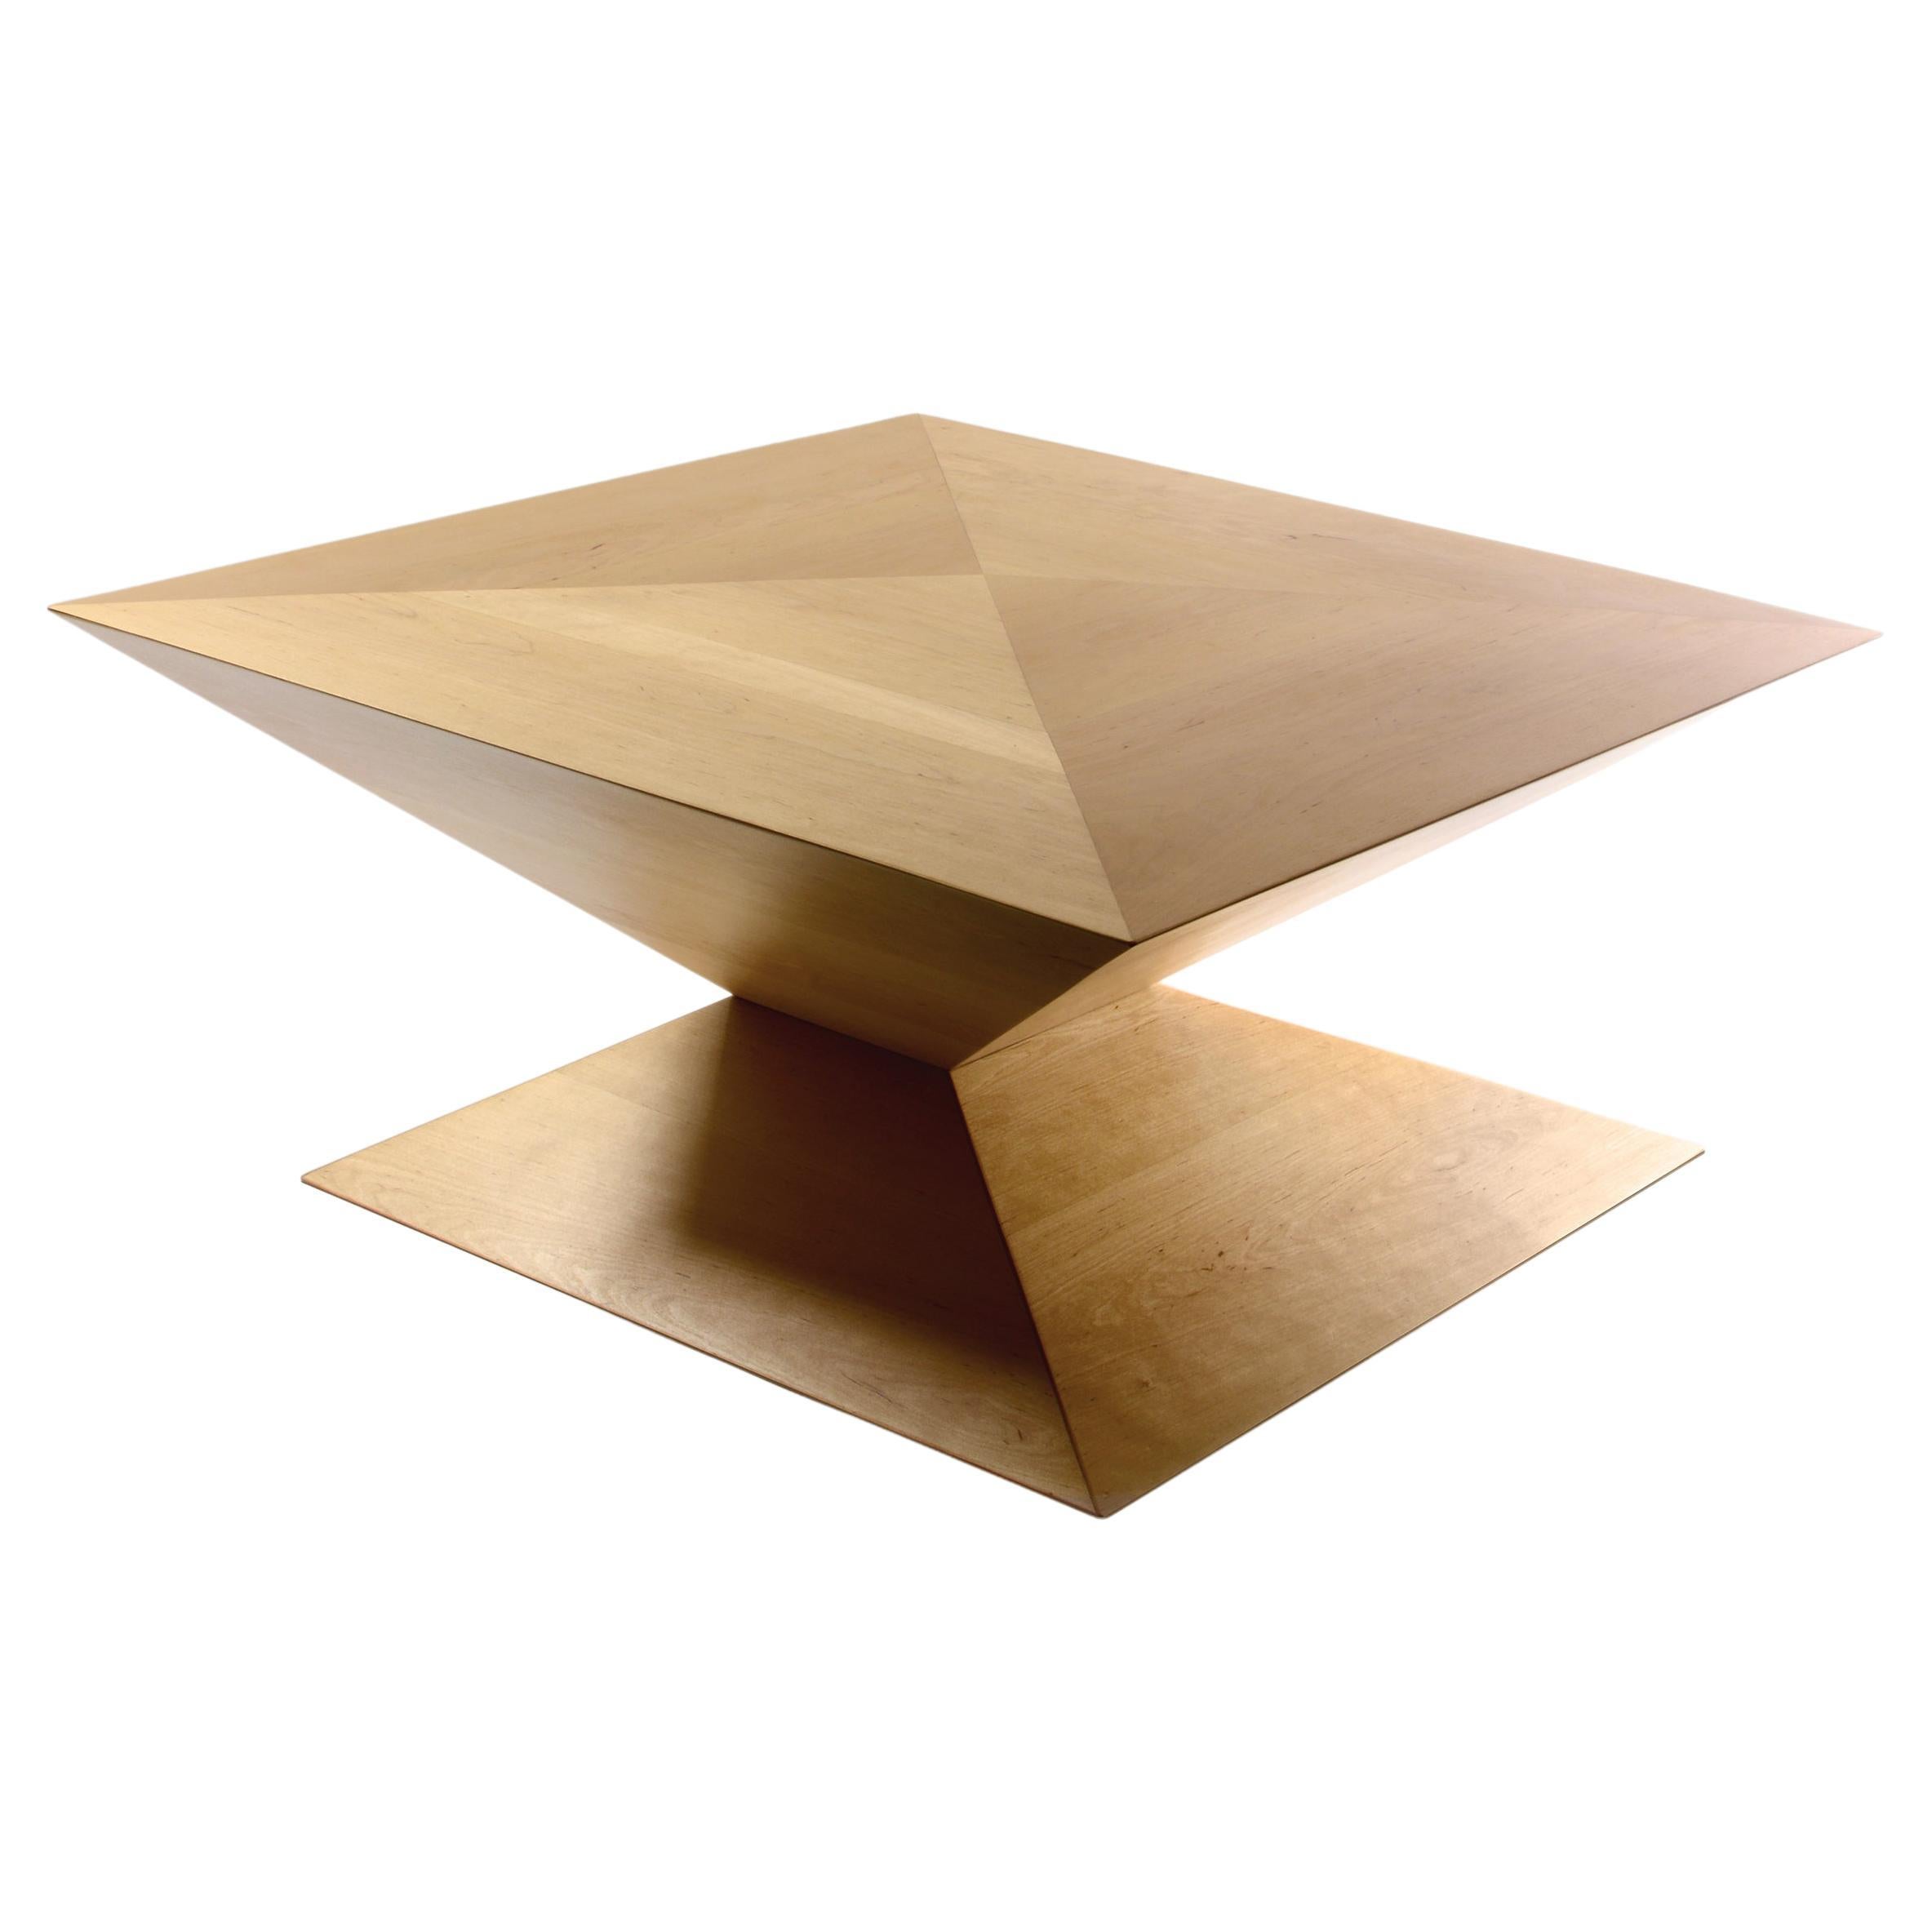 Modern Alder Coffee Table, handcrafted in Poland